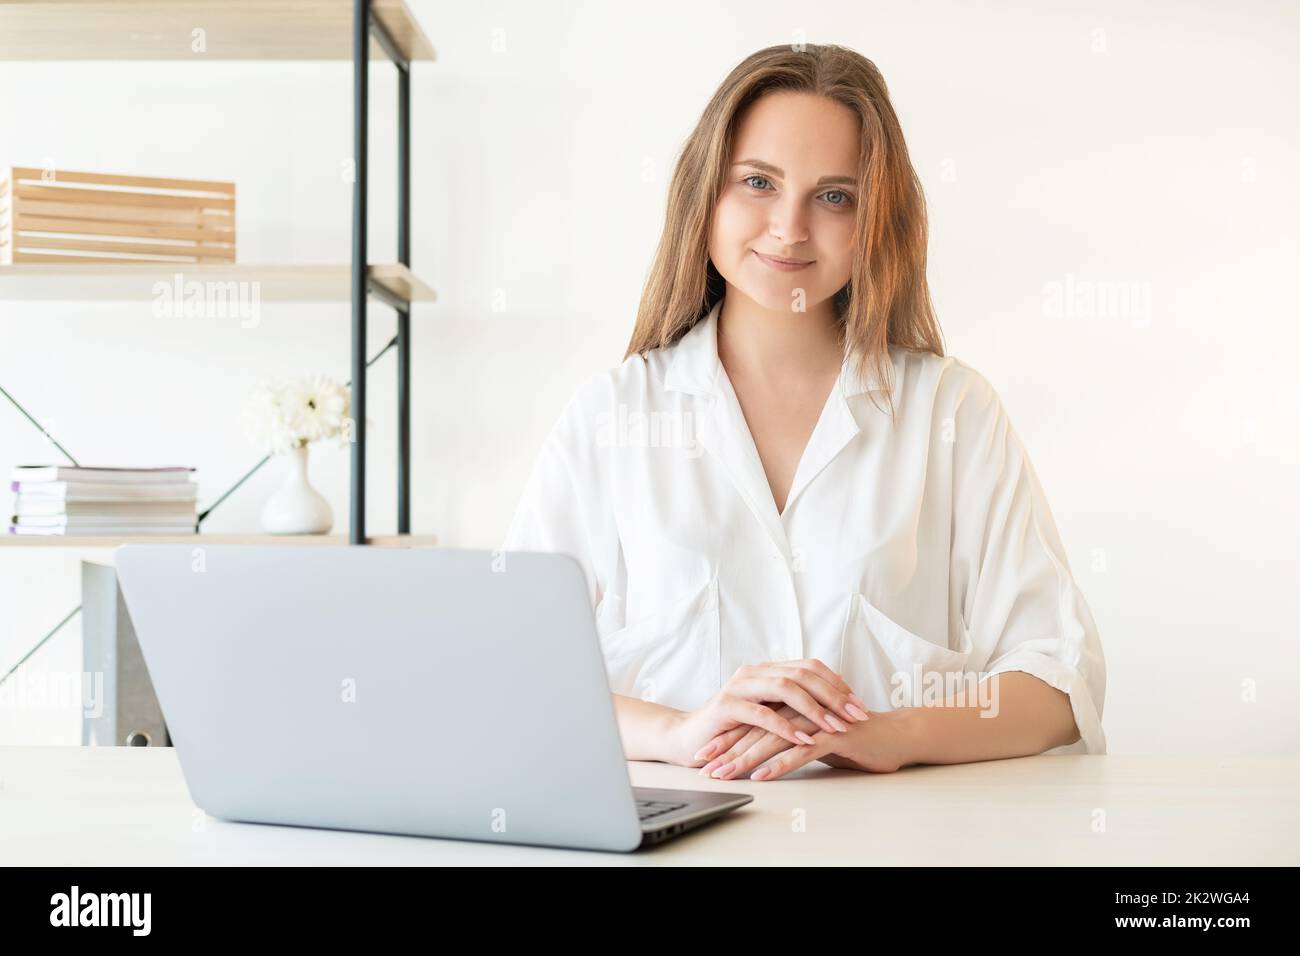 Freelancer lifestyle. Remote job. Professional career. Successful female leadership. Confident cheerful smart woman working from home office with lapt Stock Photo